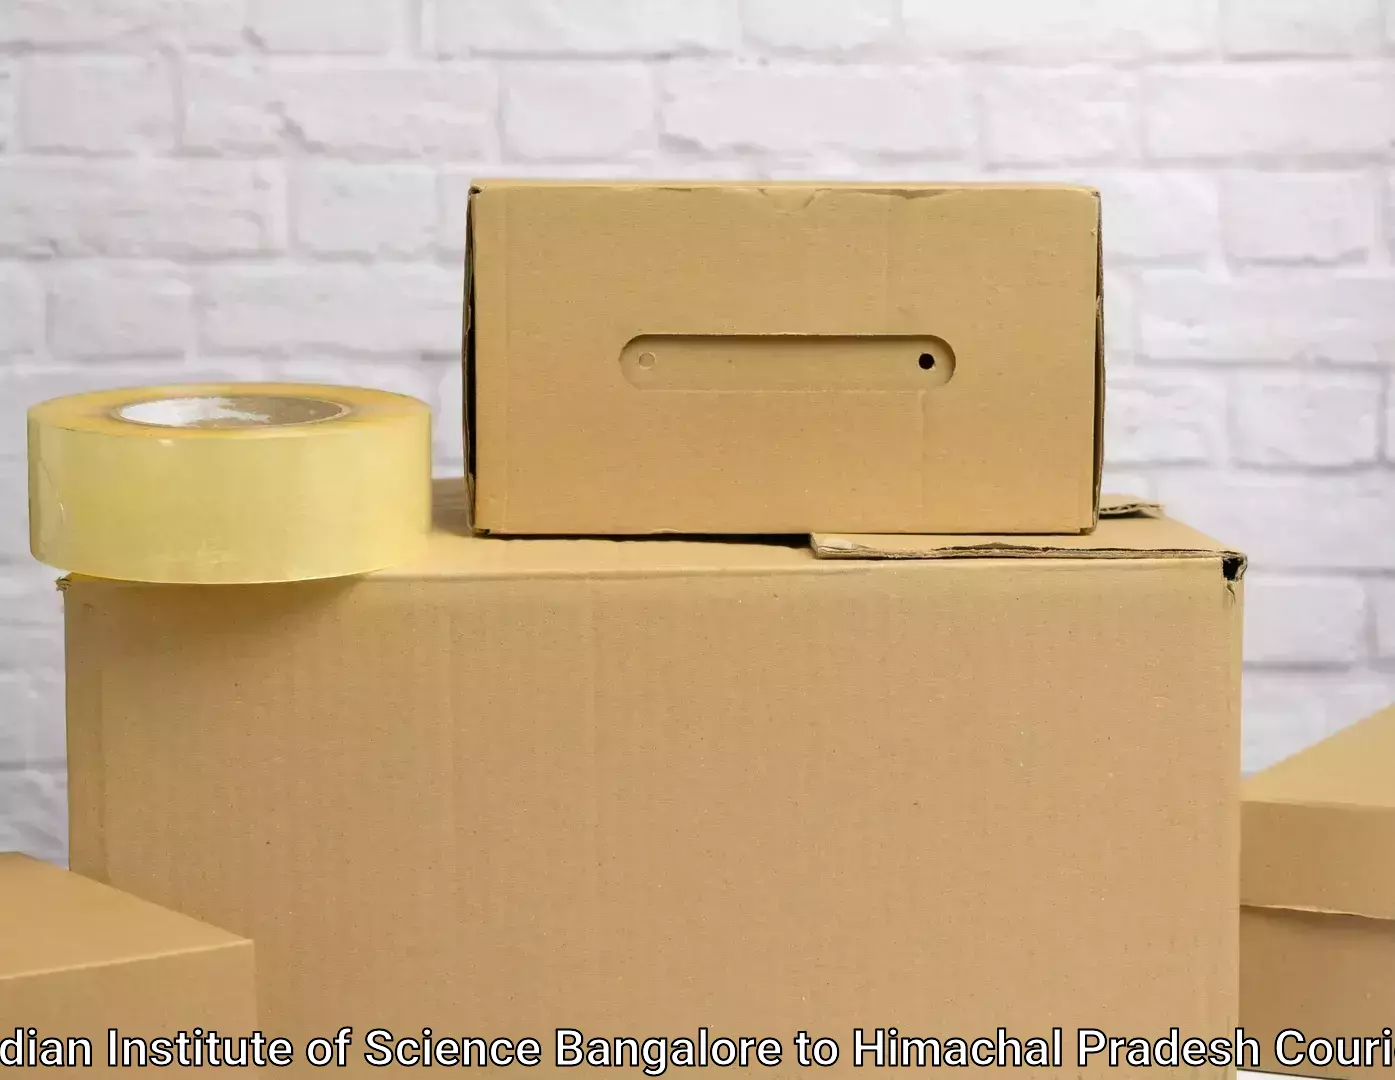 Furniture relocation services Indian Institute of Science Bangalore to Joginder Nagar